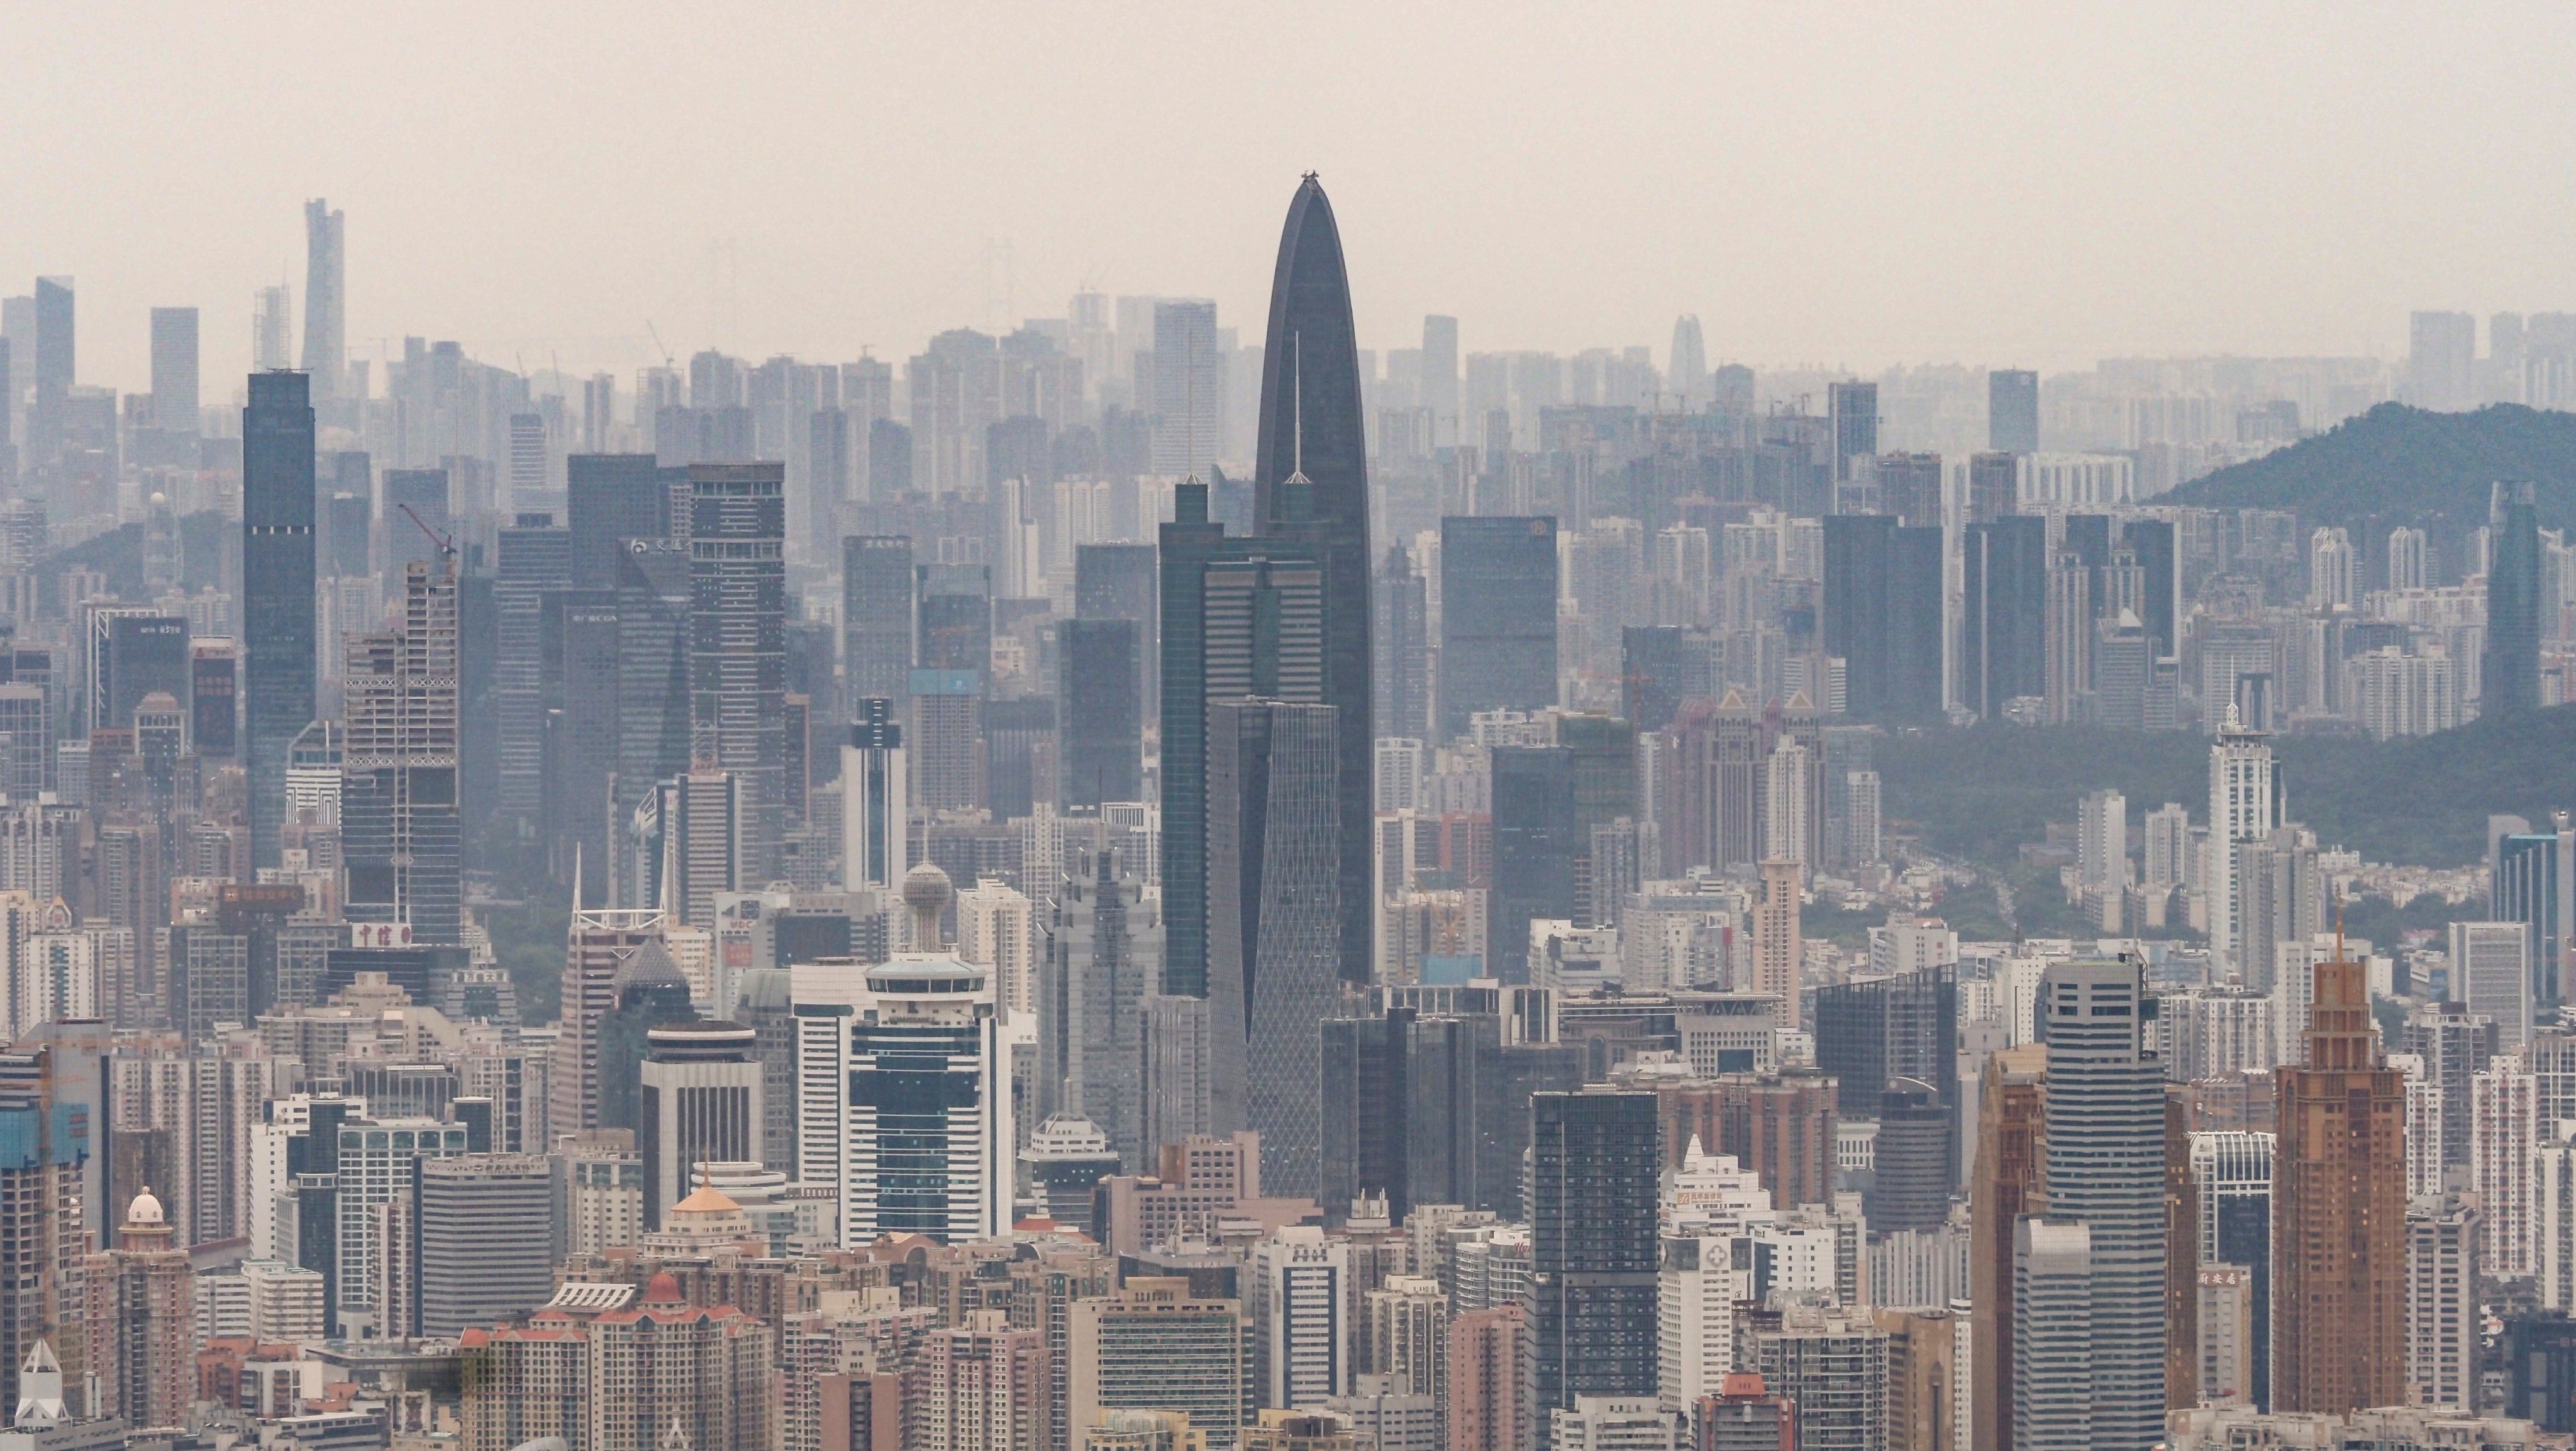 A view of the Shenzhen-Hong Kong border in the Greater Bay Area. Photo: Martin Chan